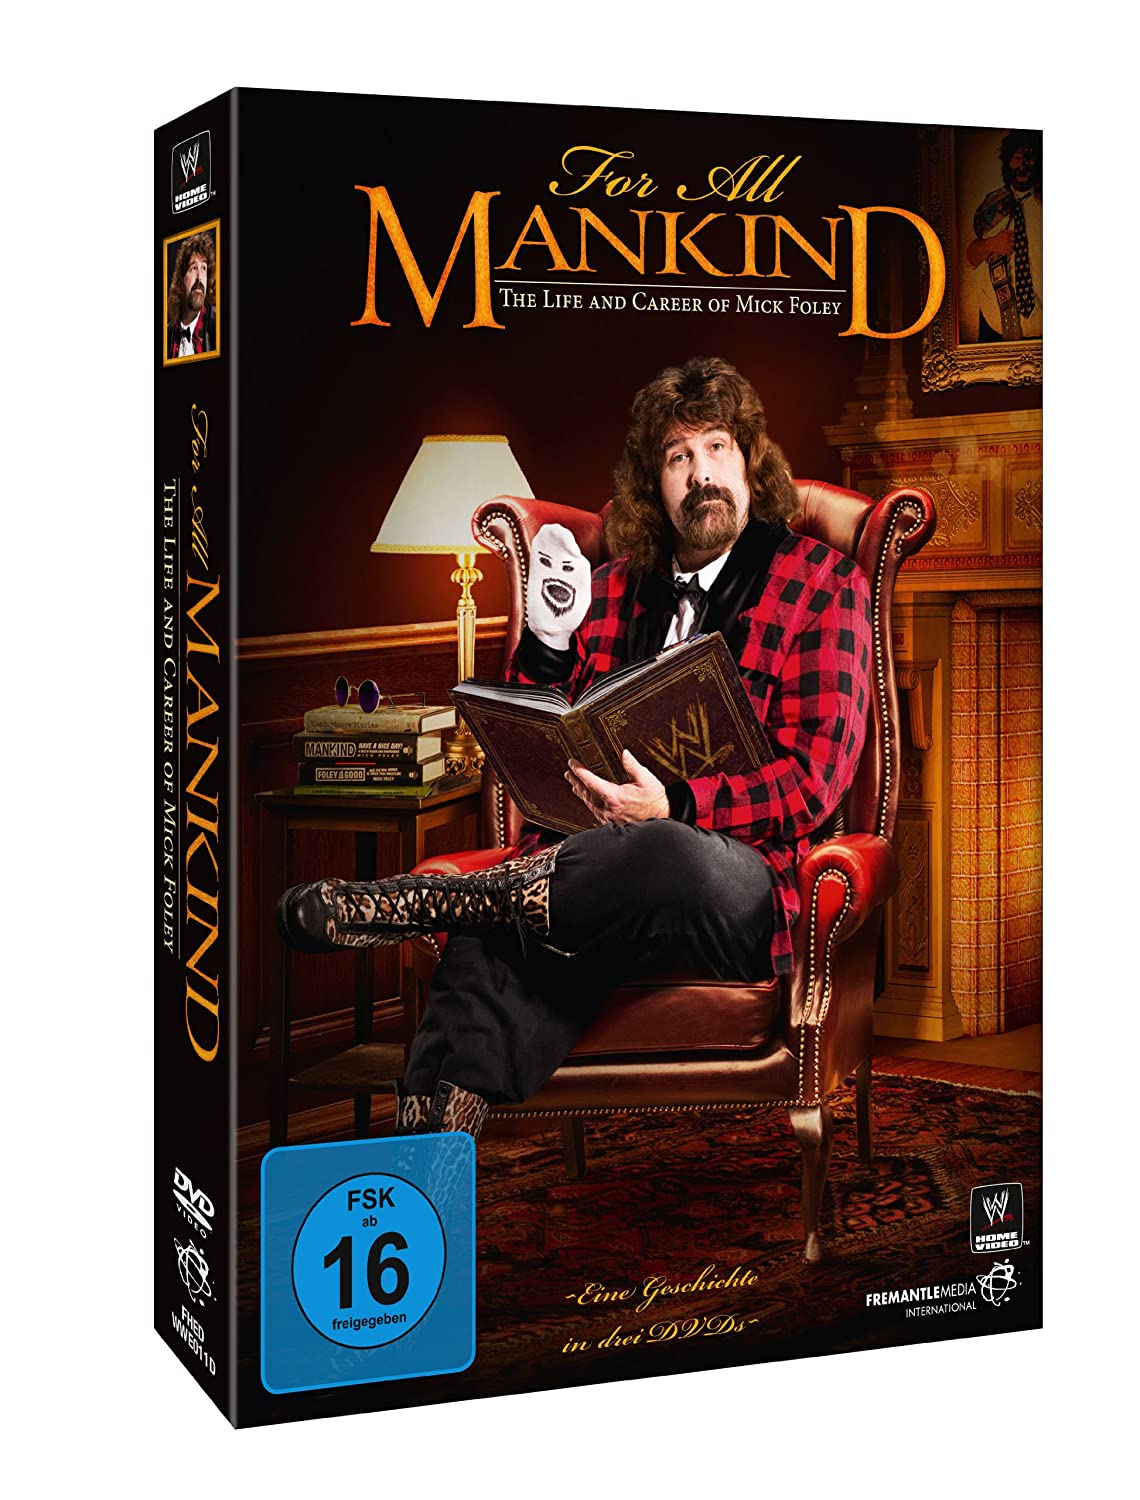 WWE - For All Mankind - The Life & Career of Mick Foley